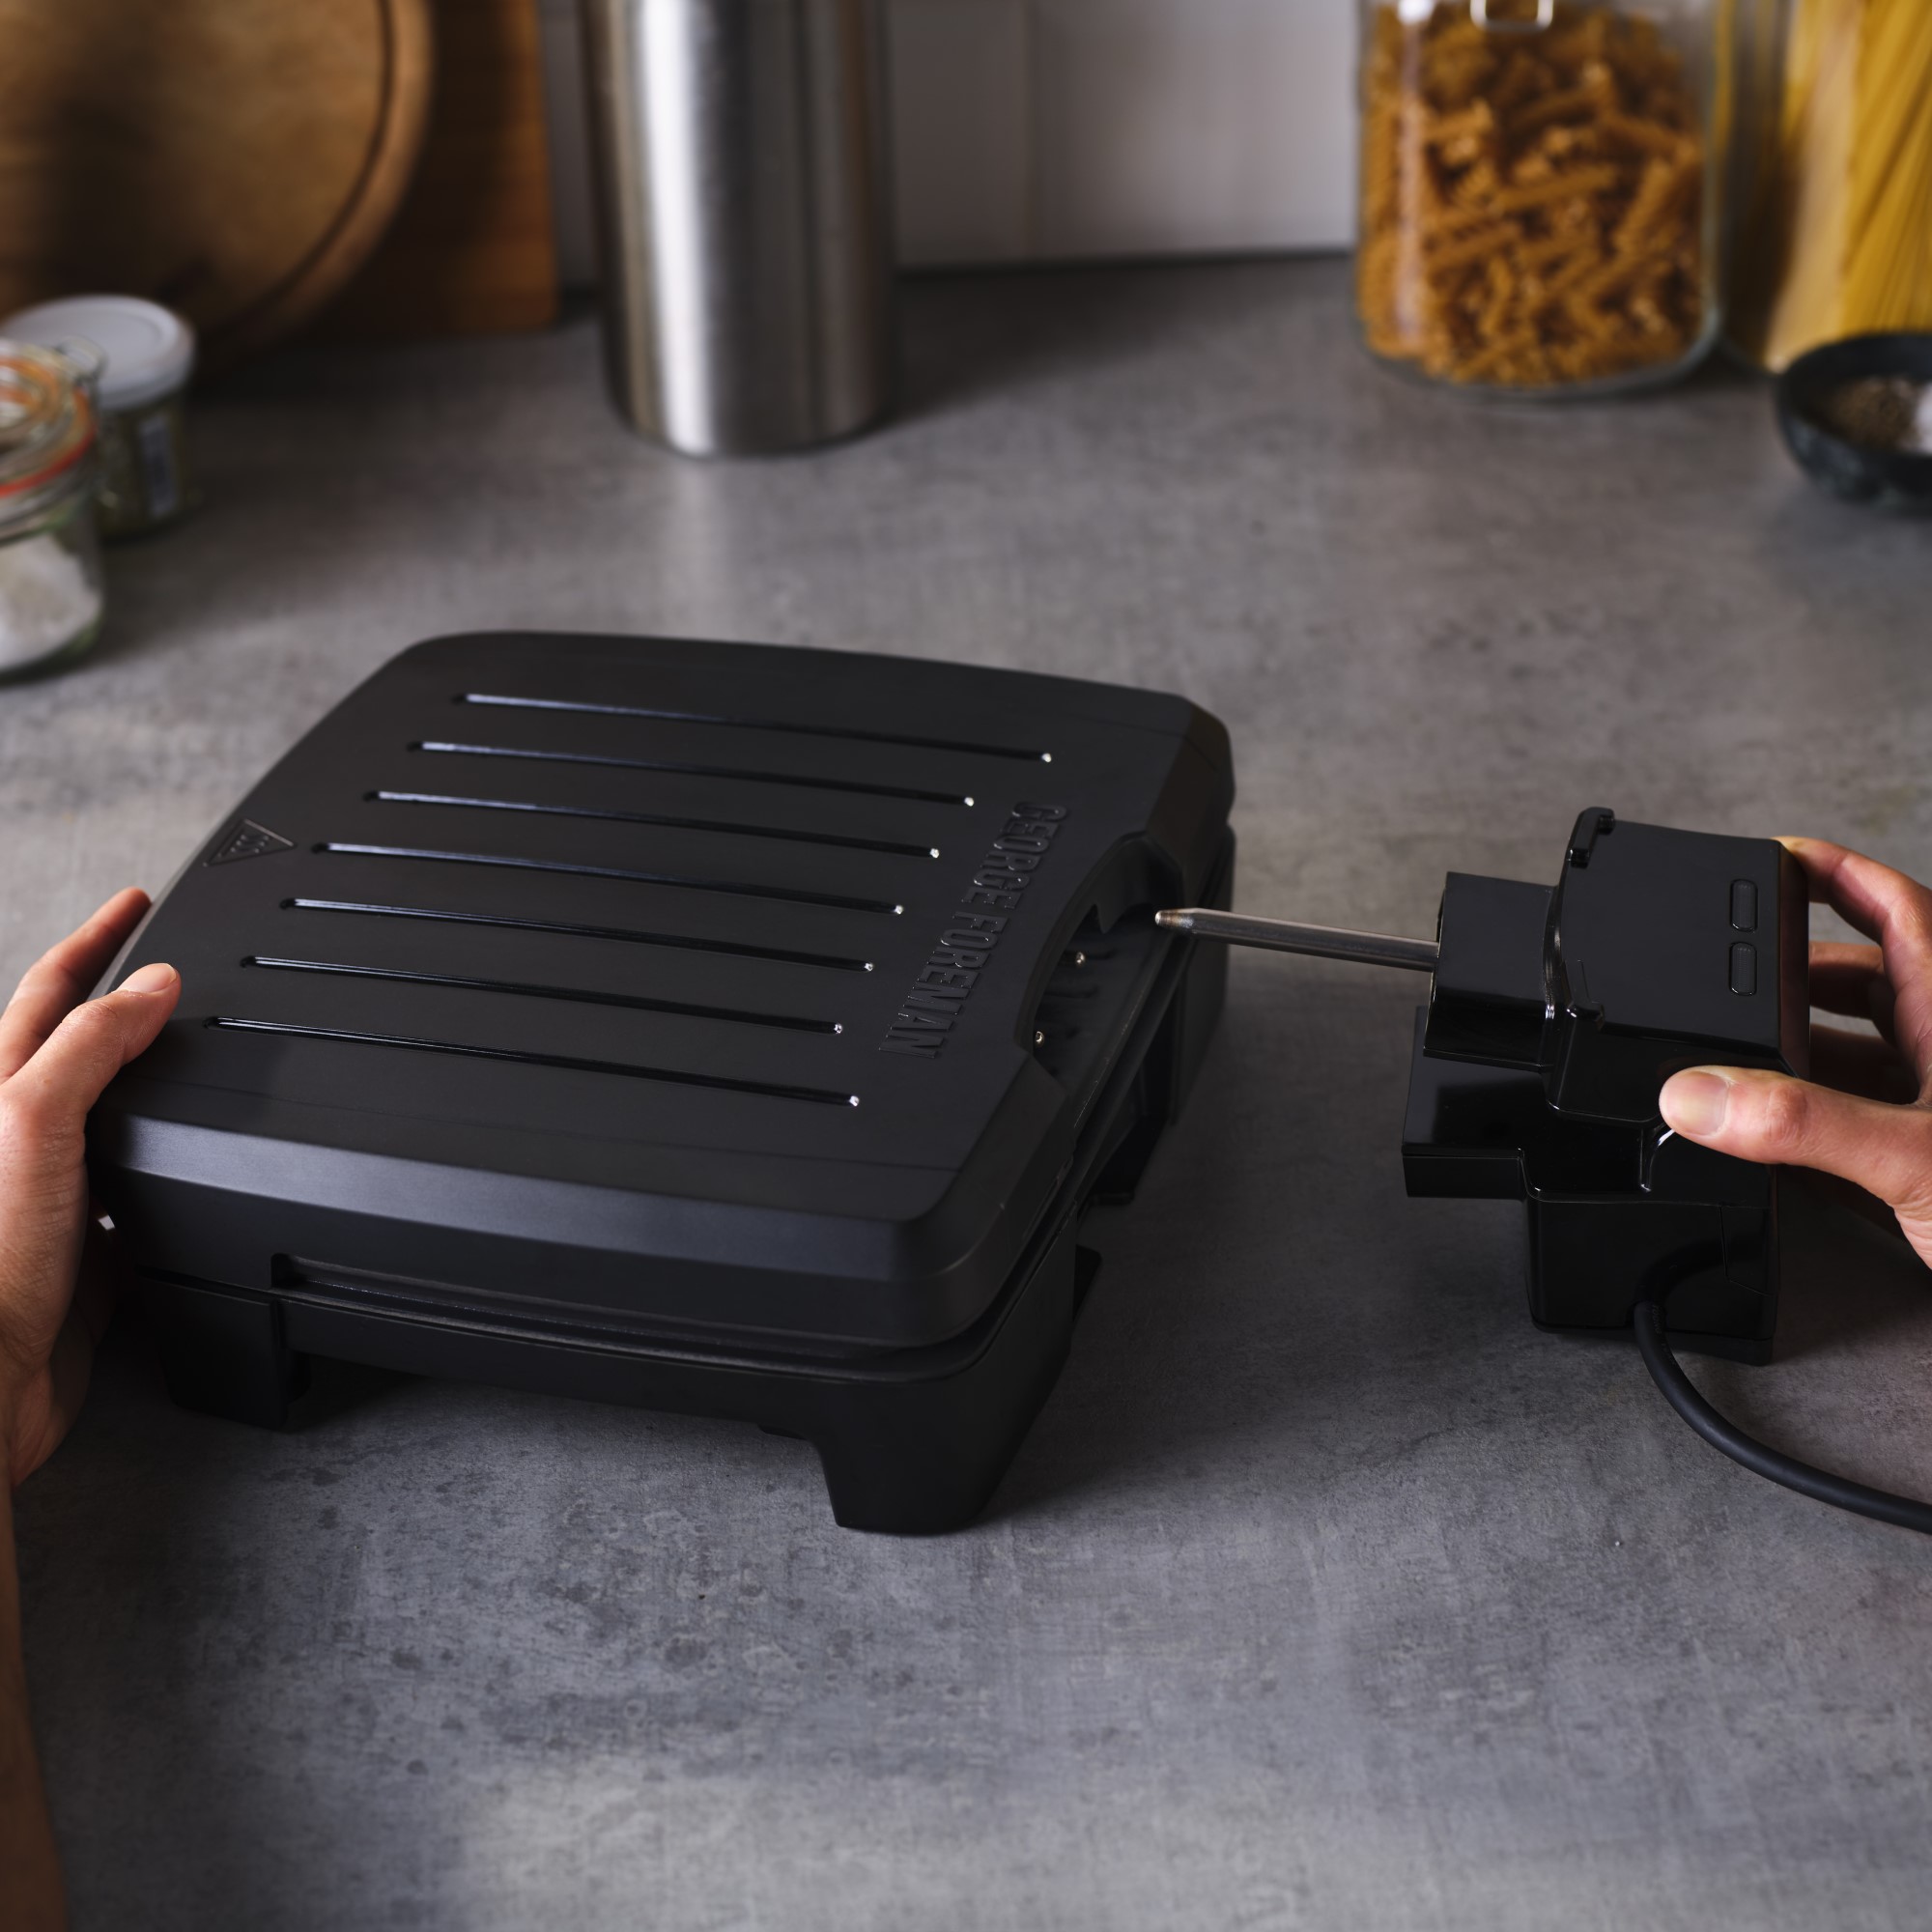 George Foreman Grill and Panini Cooking Grill - 5 Serving - Dutch Goat